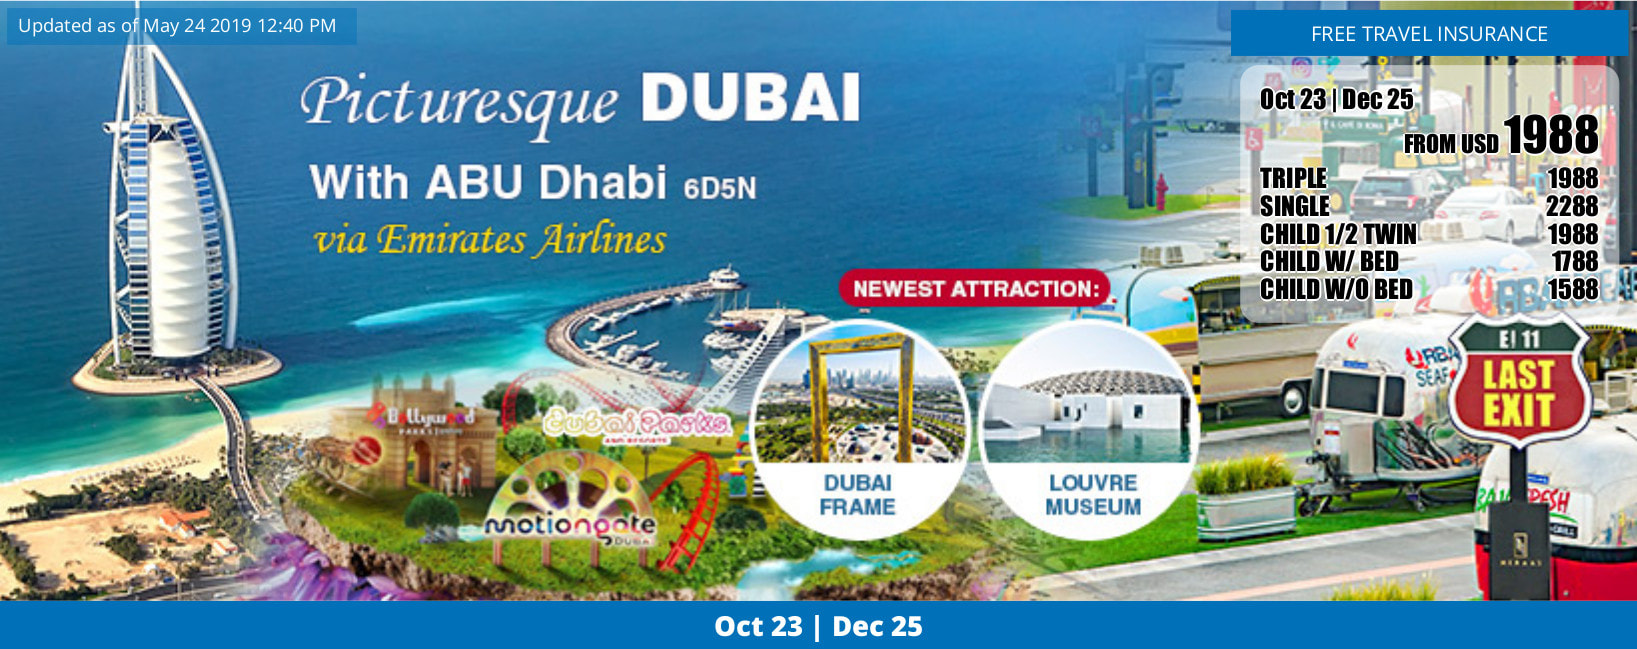 Dubai 6 days tour 2019 Dec 25 flyer, click for detailed itinerary jpg file